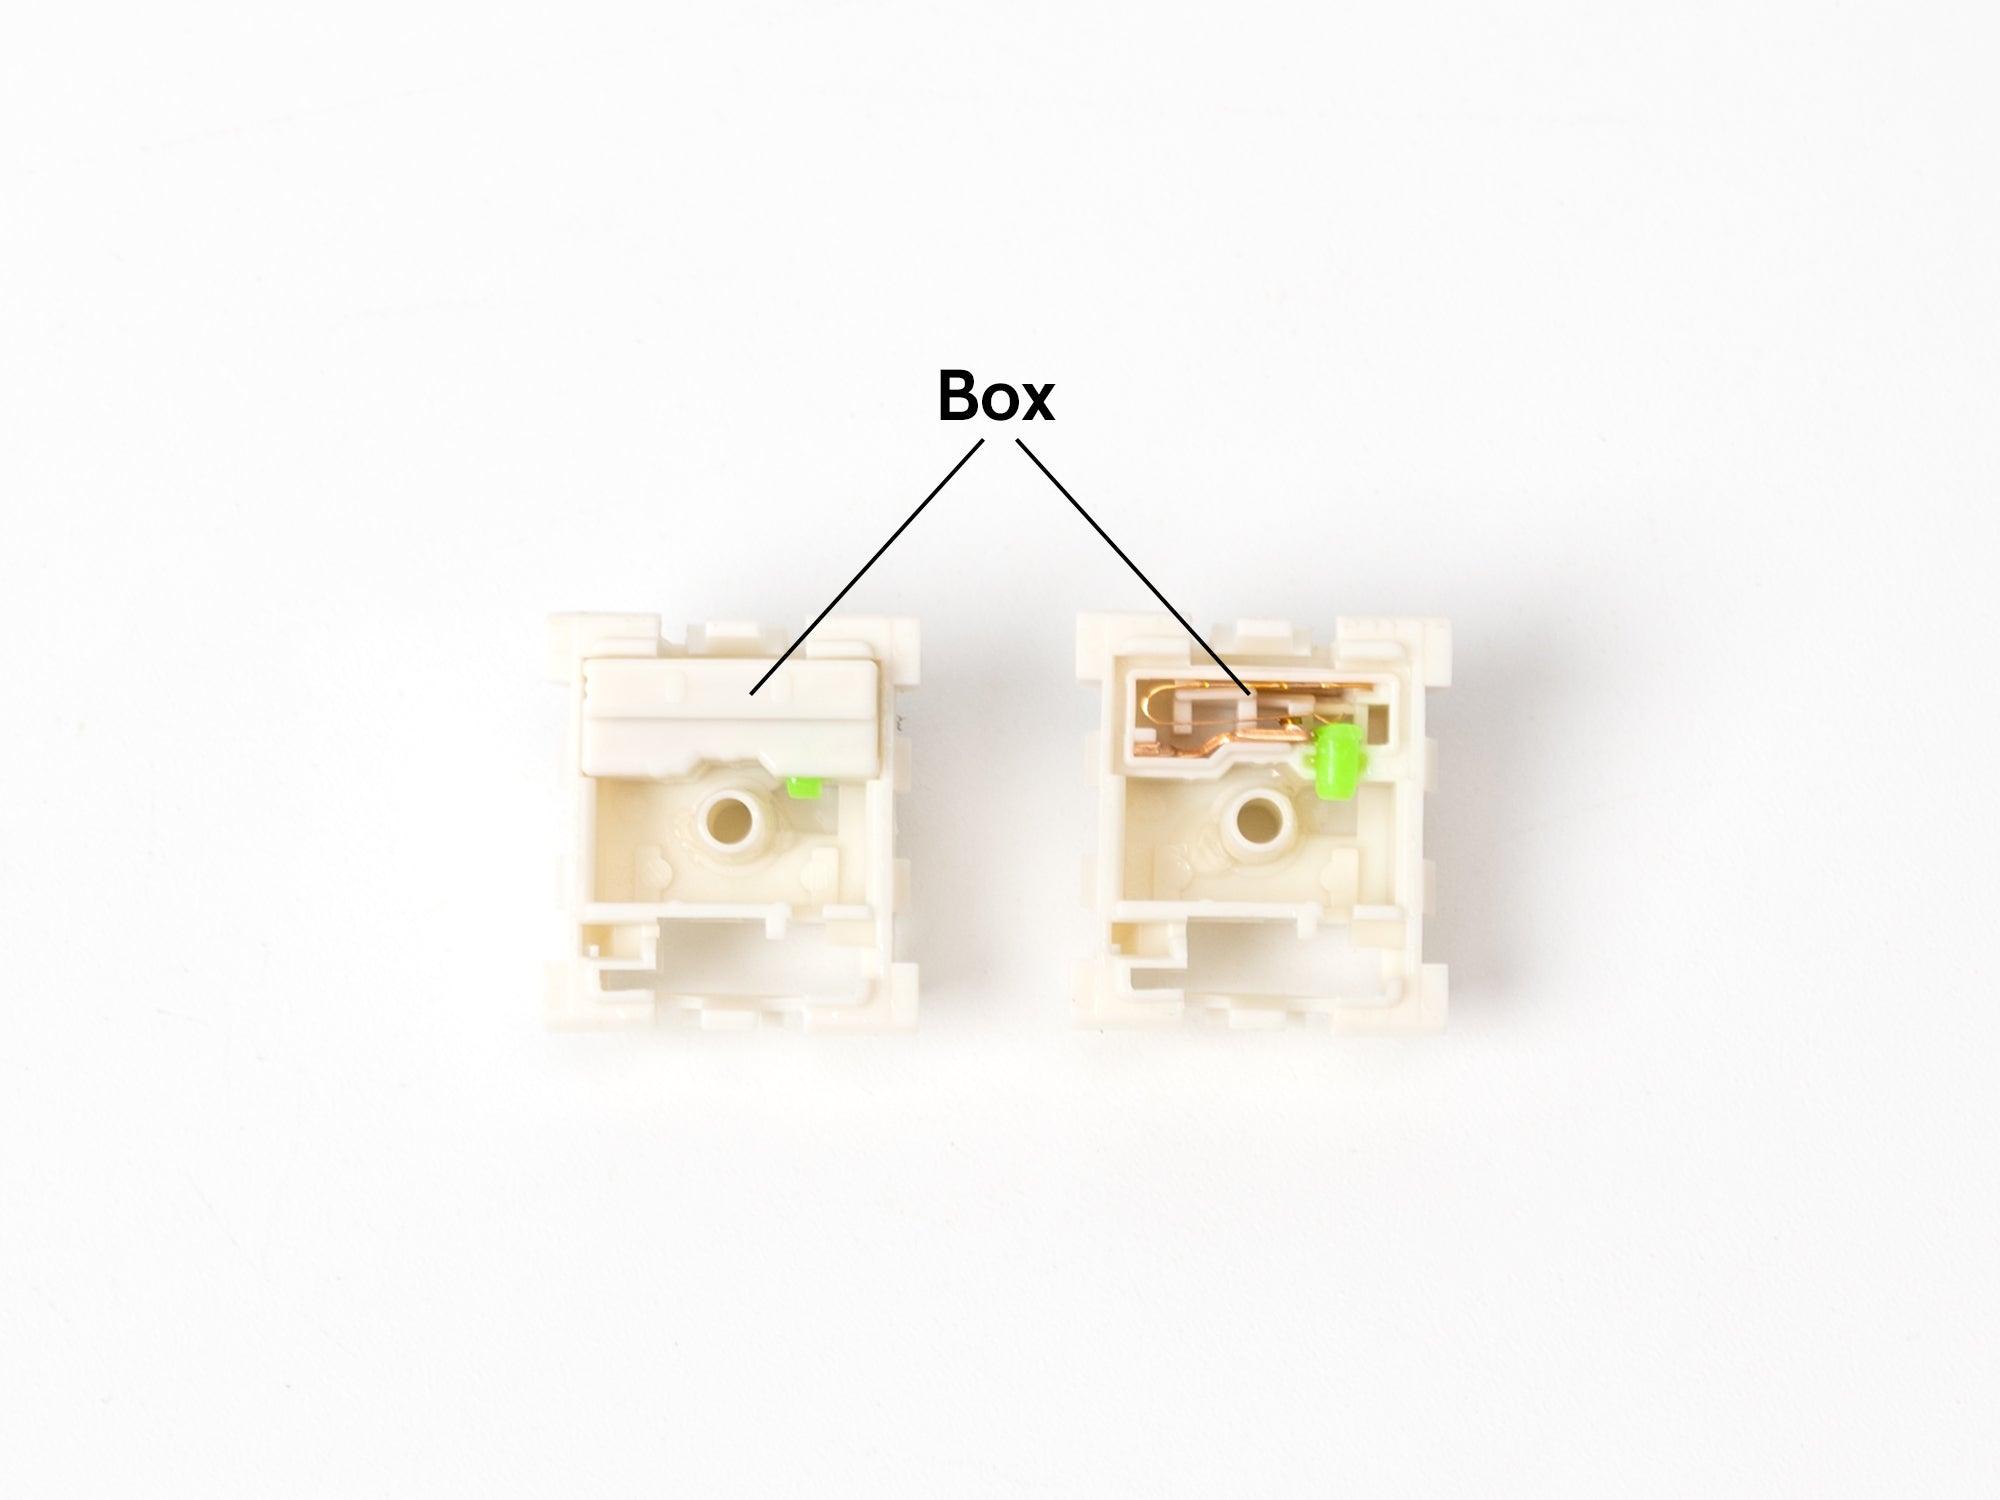 Kailh Box Switch “Box” Structure